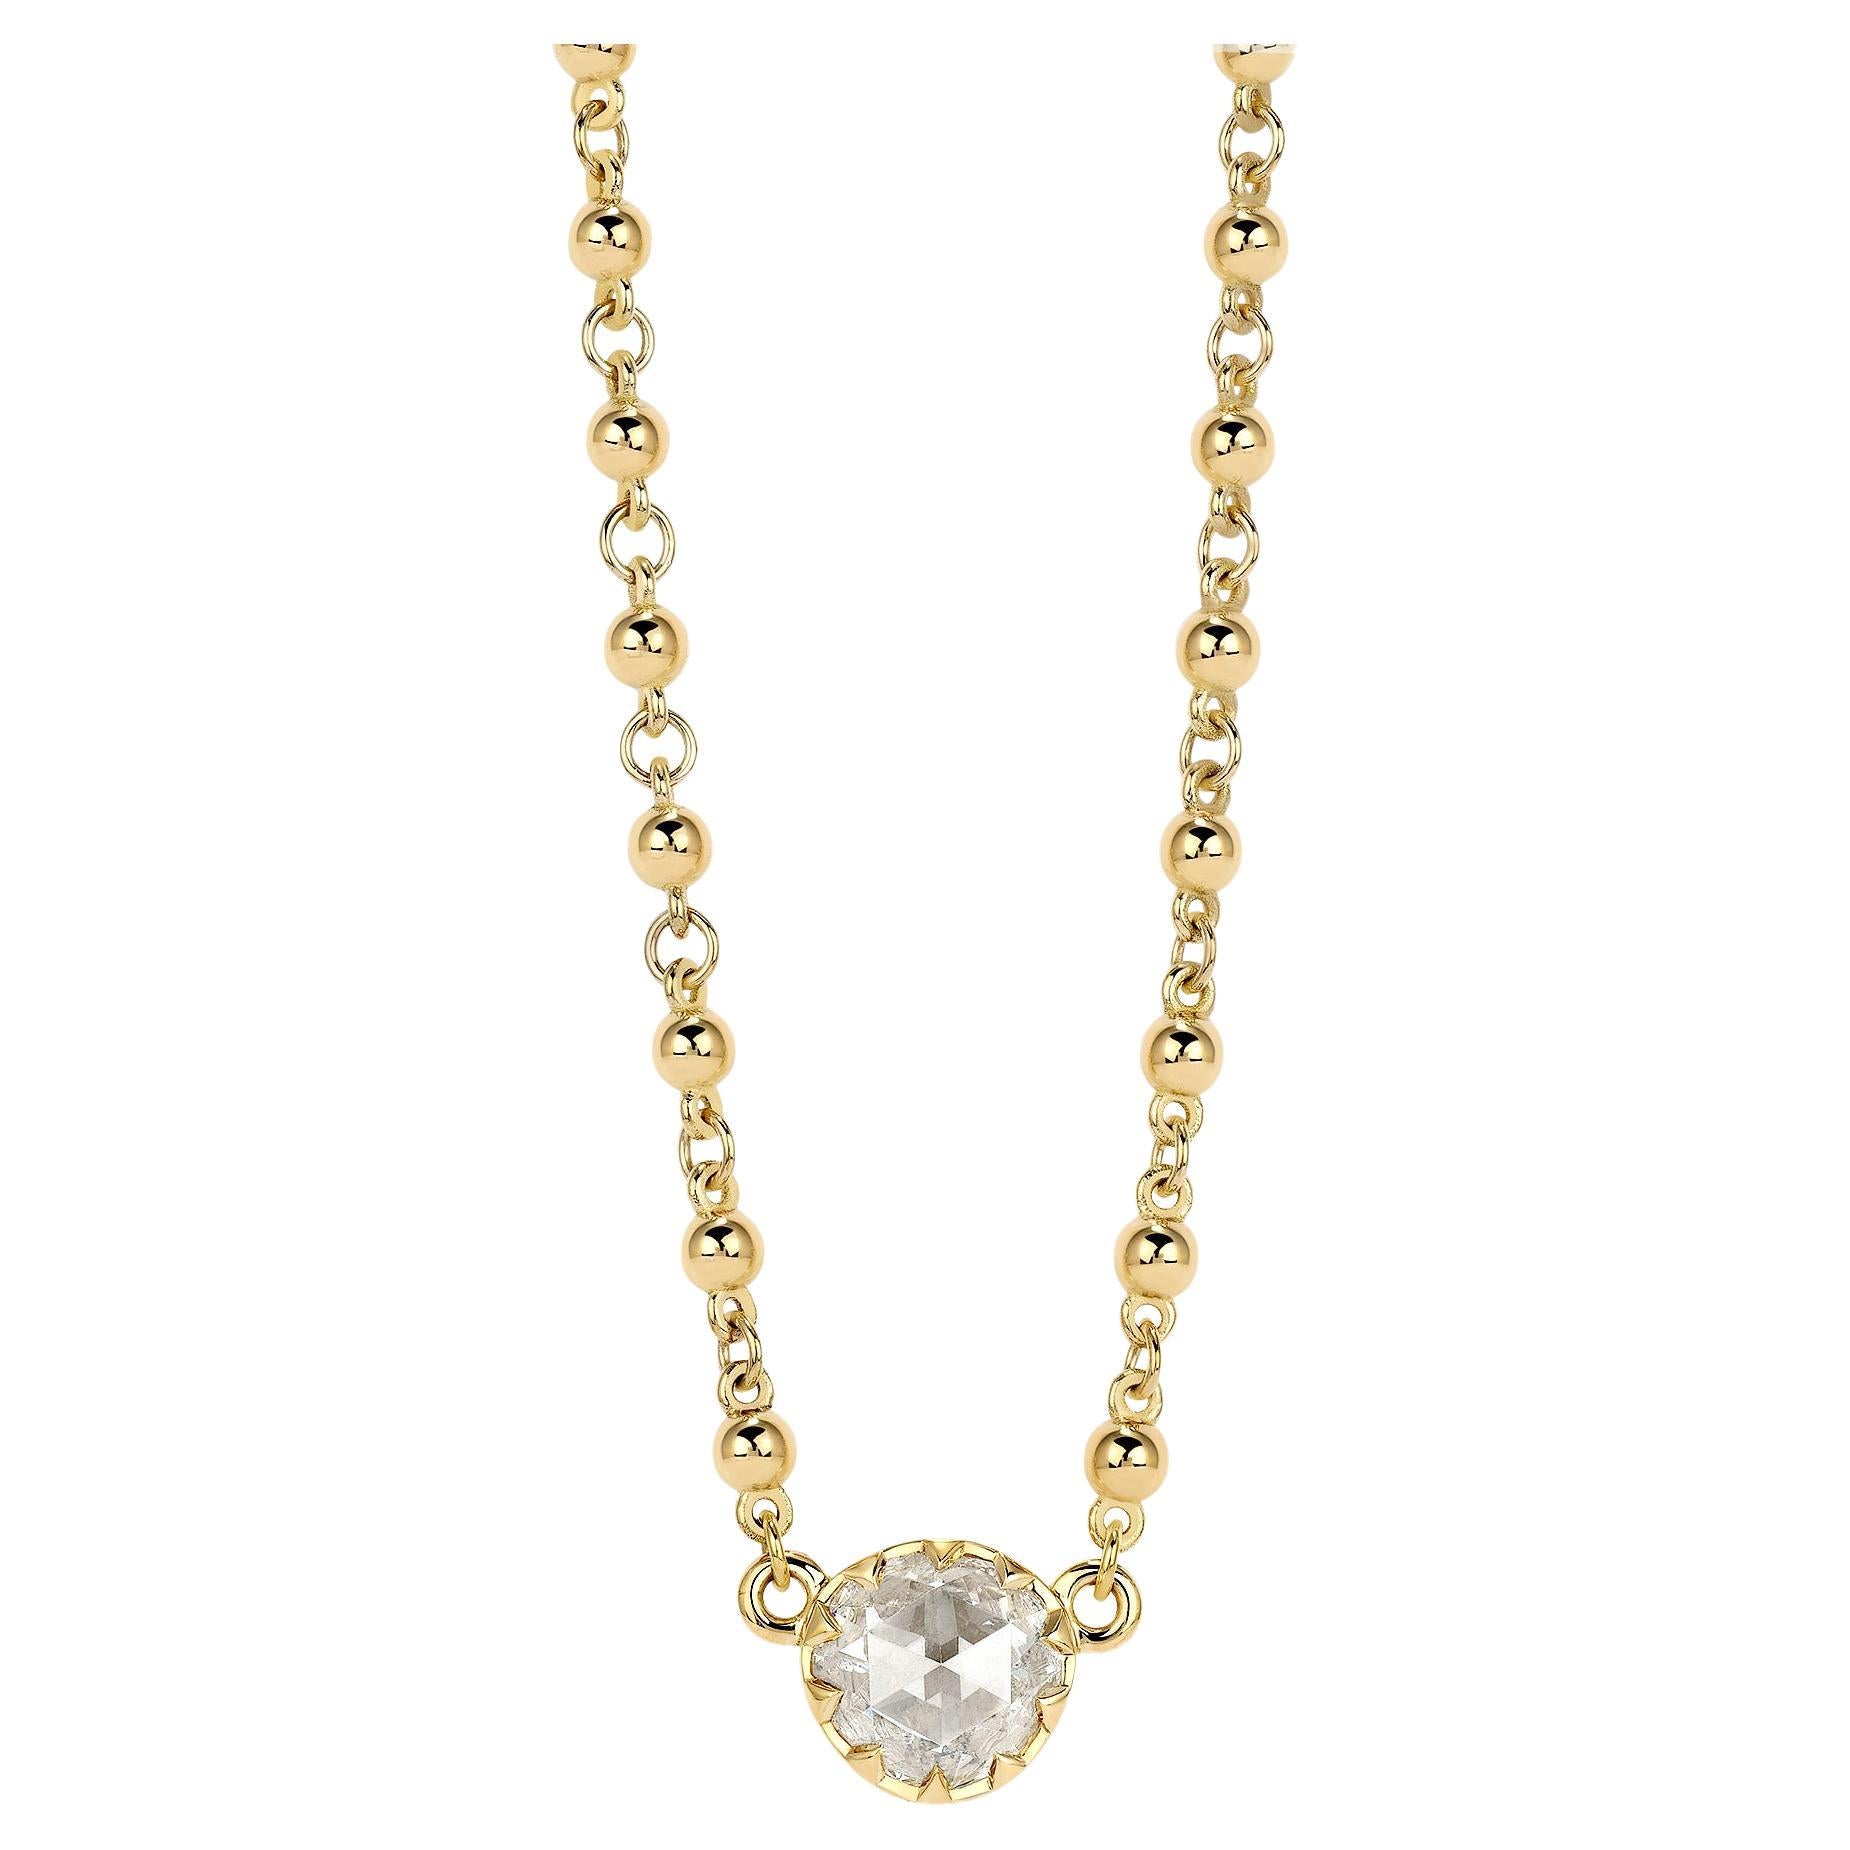 Handcrafted Rosalina Rose Cut Diamond Pendant Necklace by Single Stone For Sale